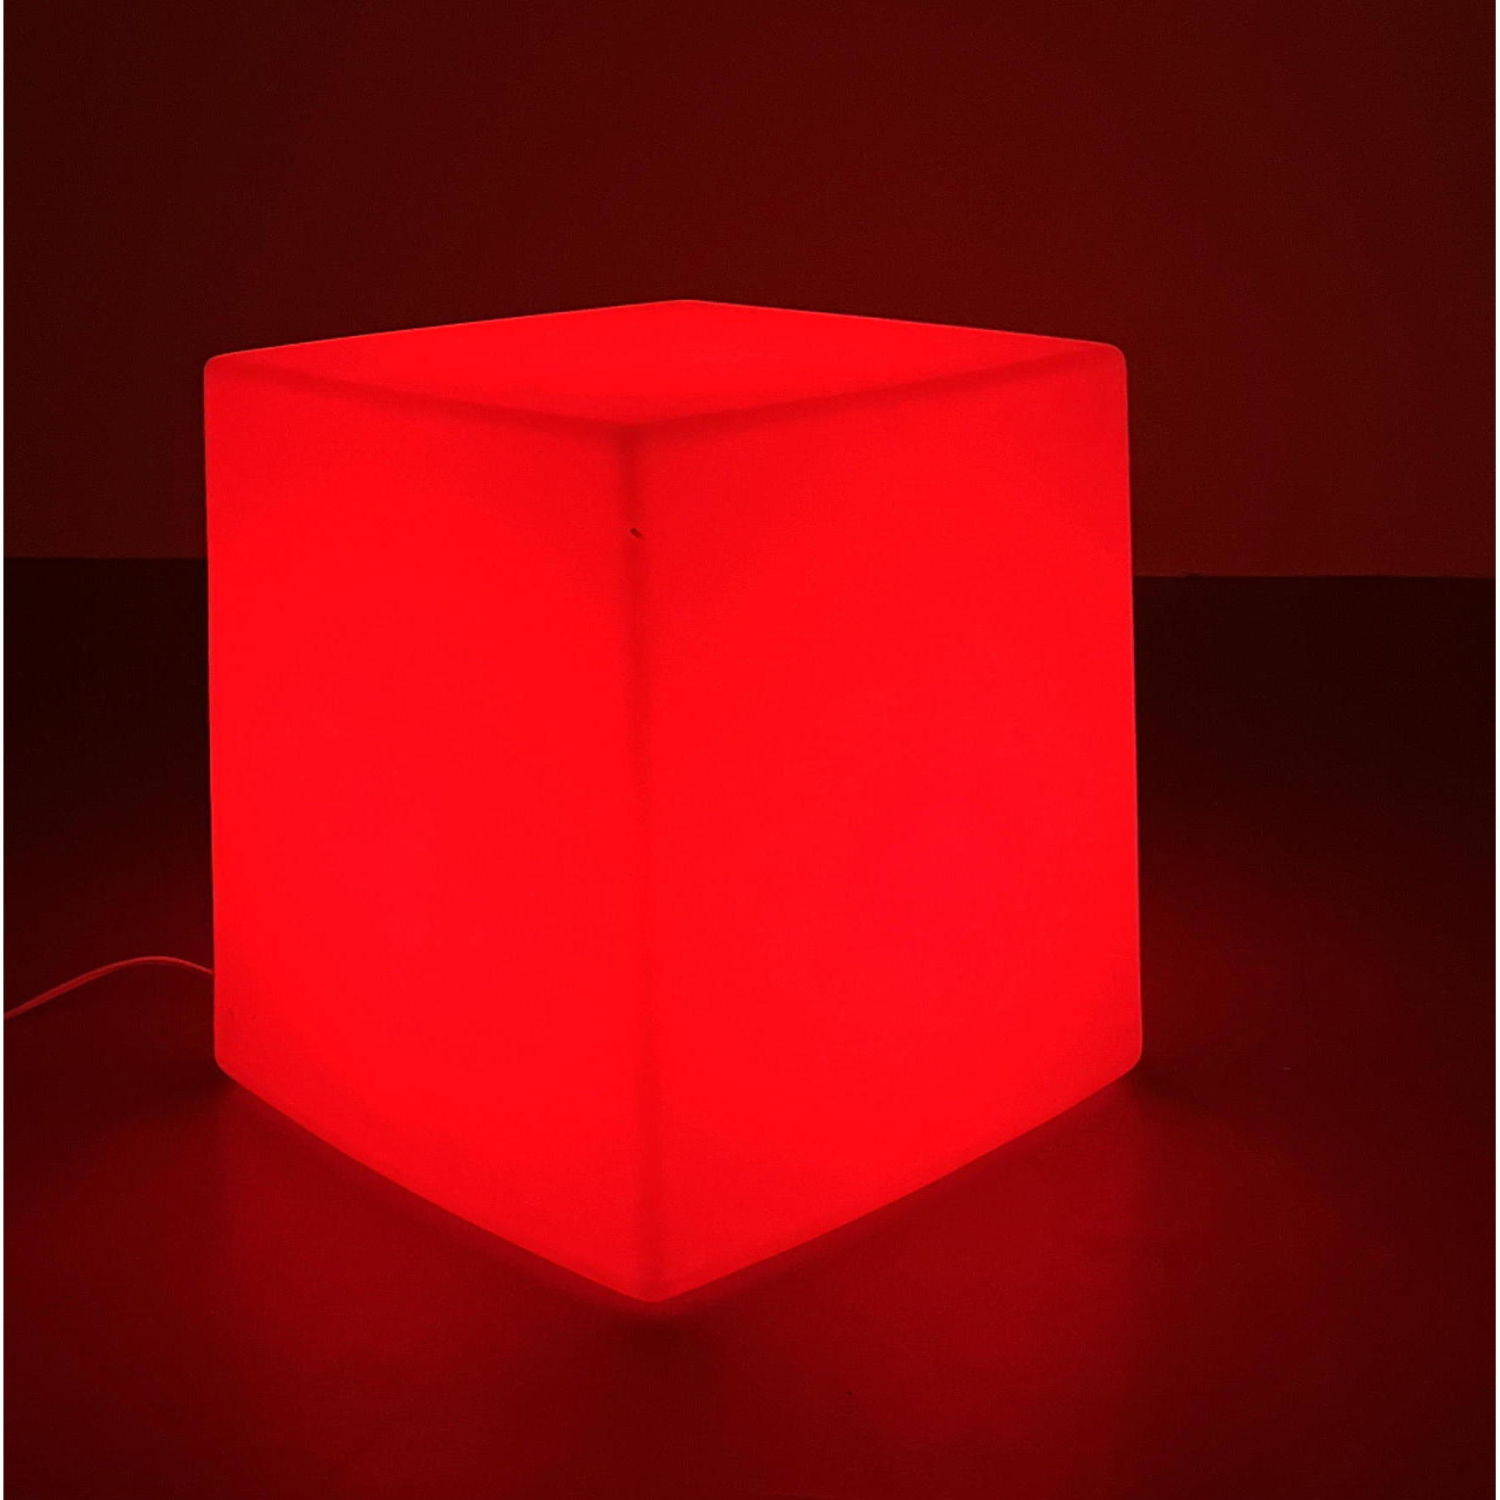 French Plastic Cube Lamp. Color Changing.